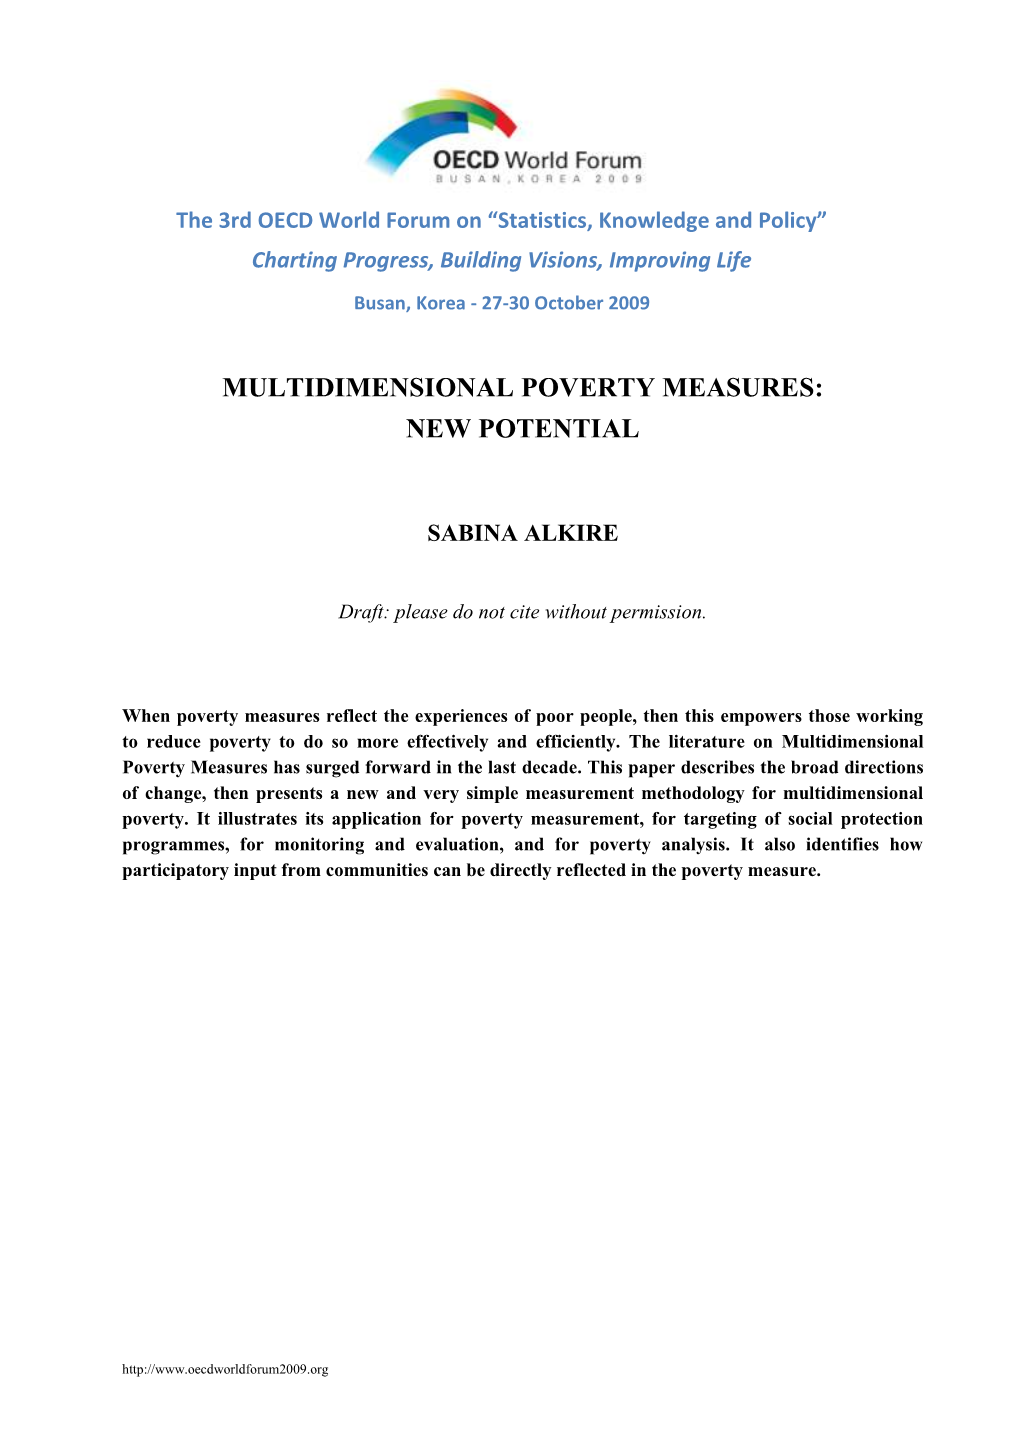 Multidimensional Poverty Measures: New Potential